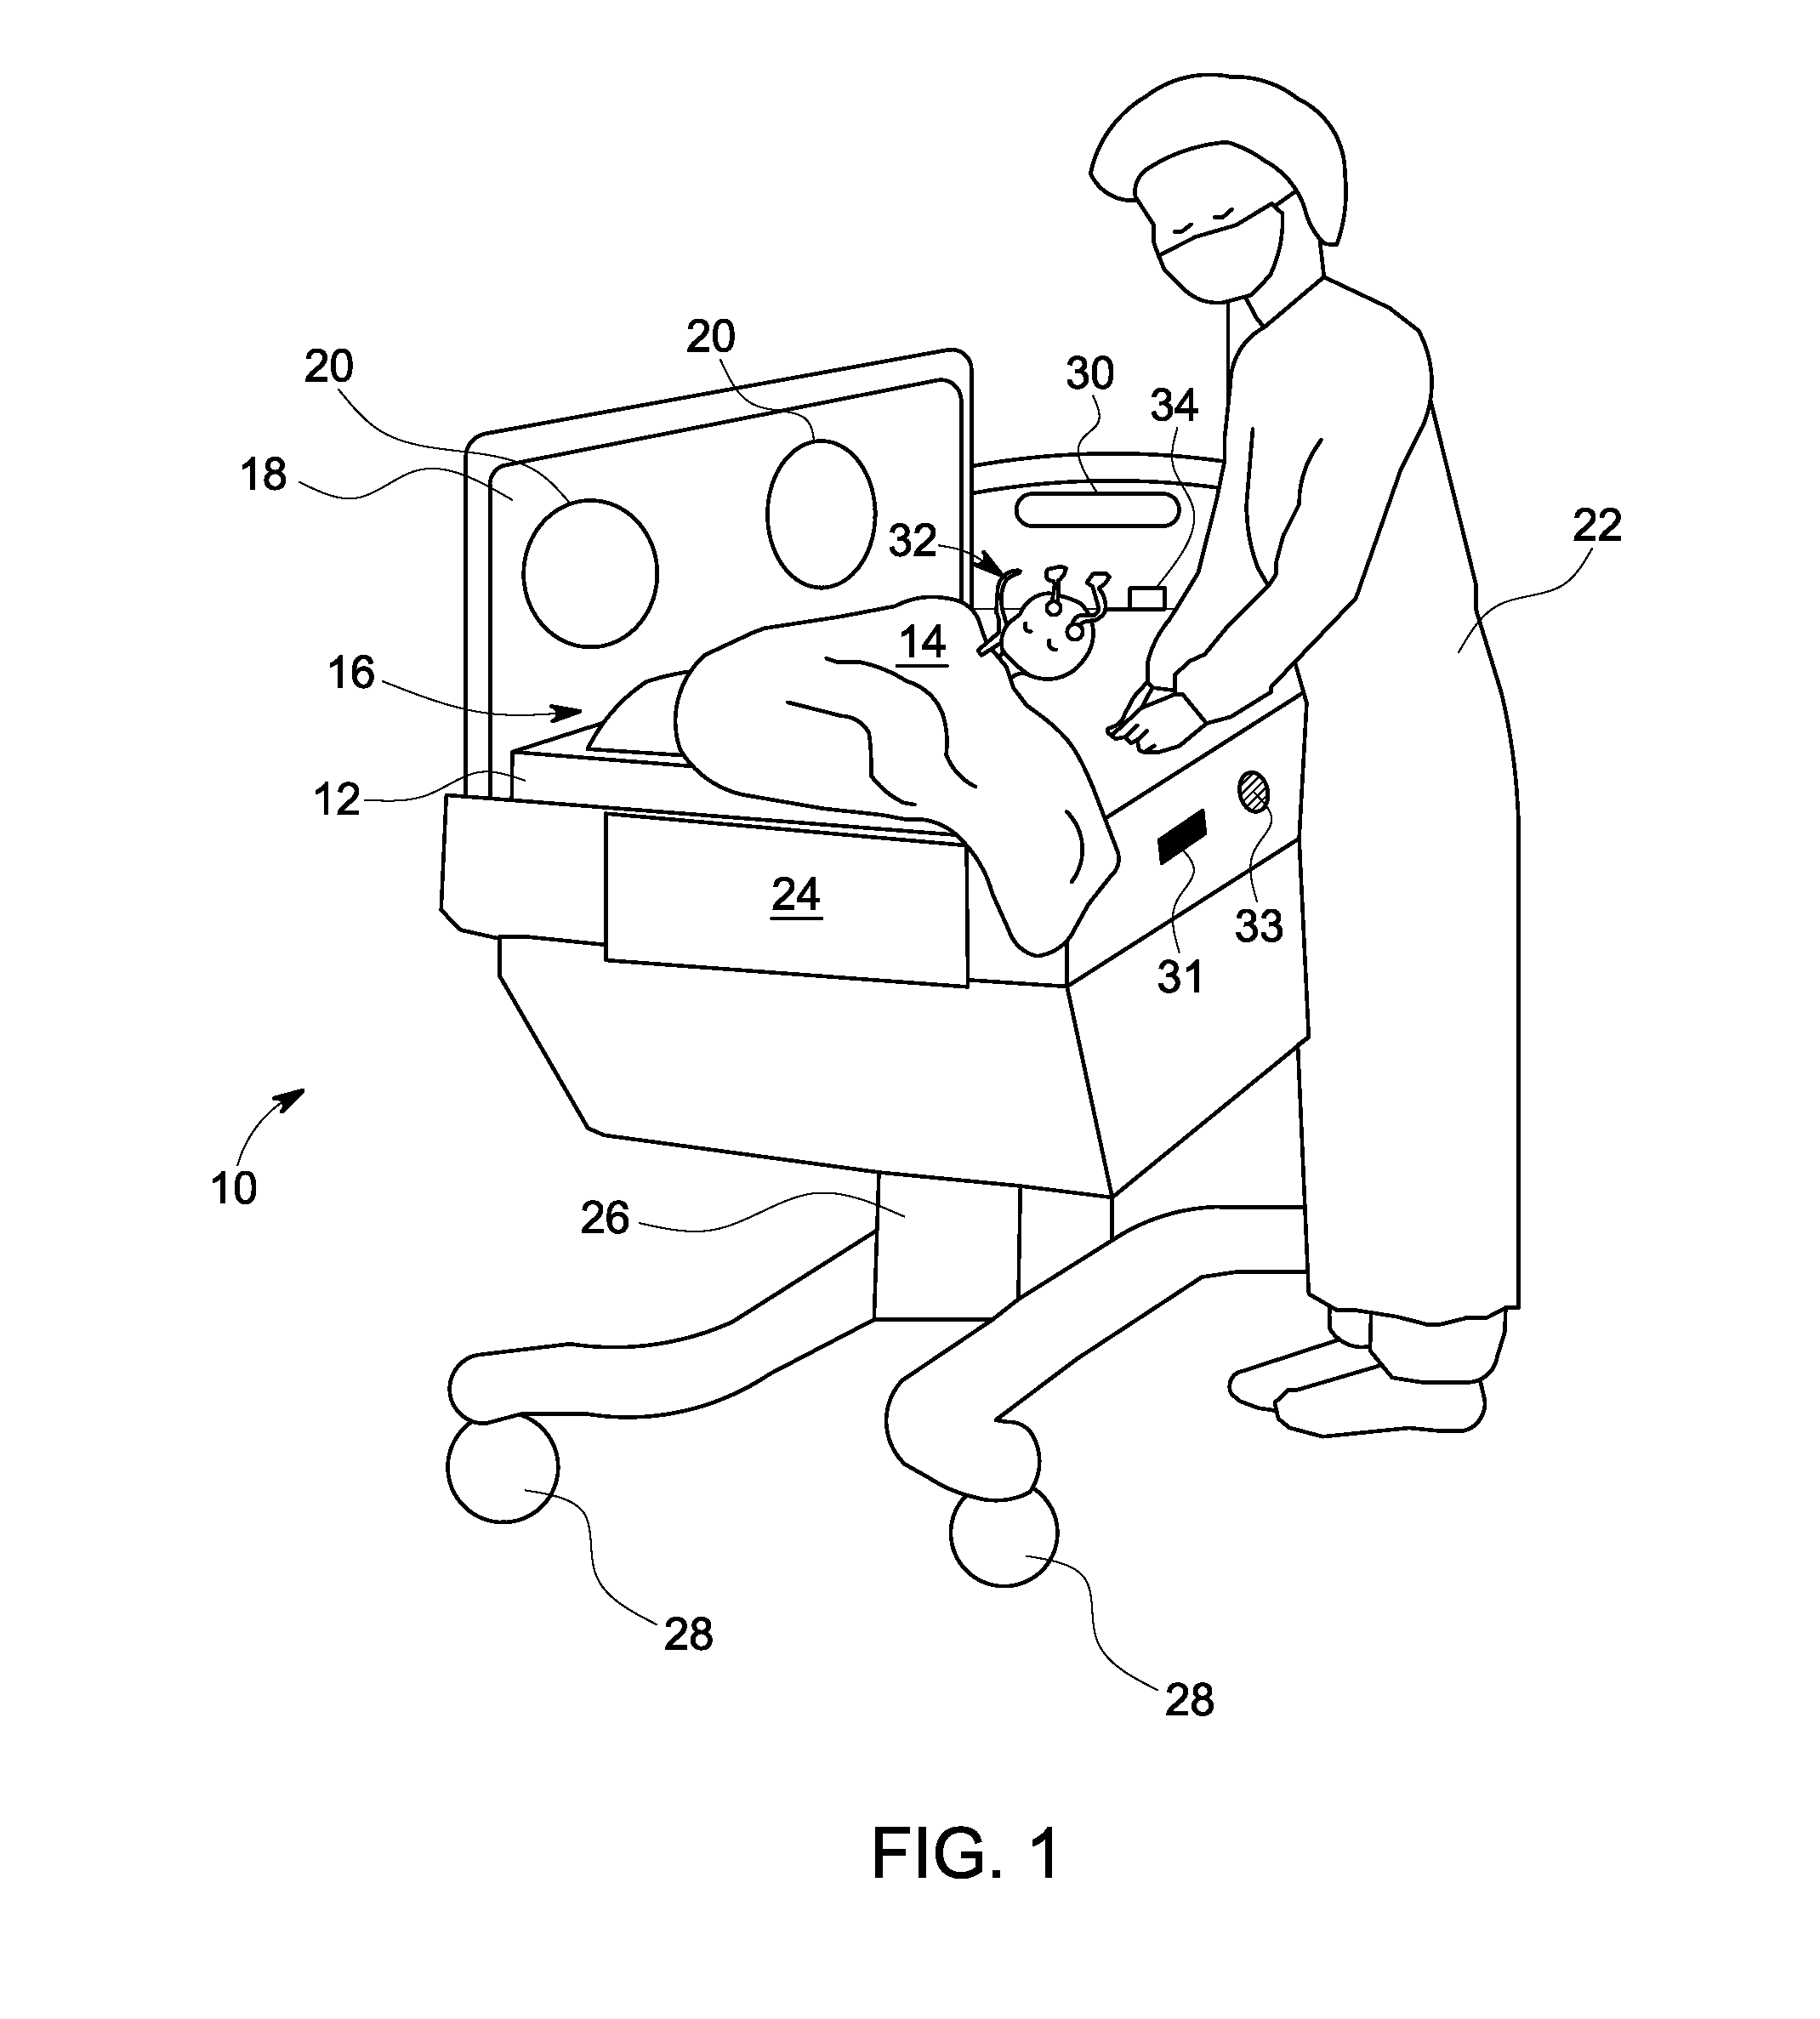 System and Method of Neonatal Care